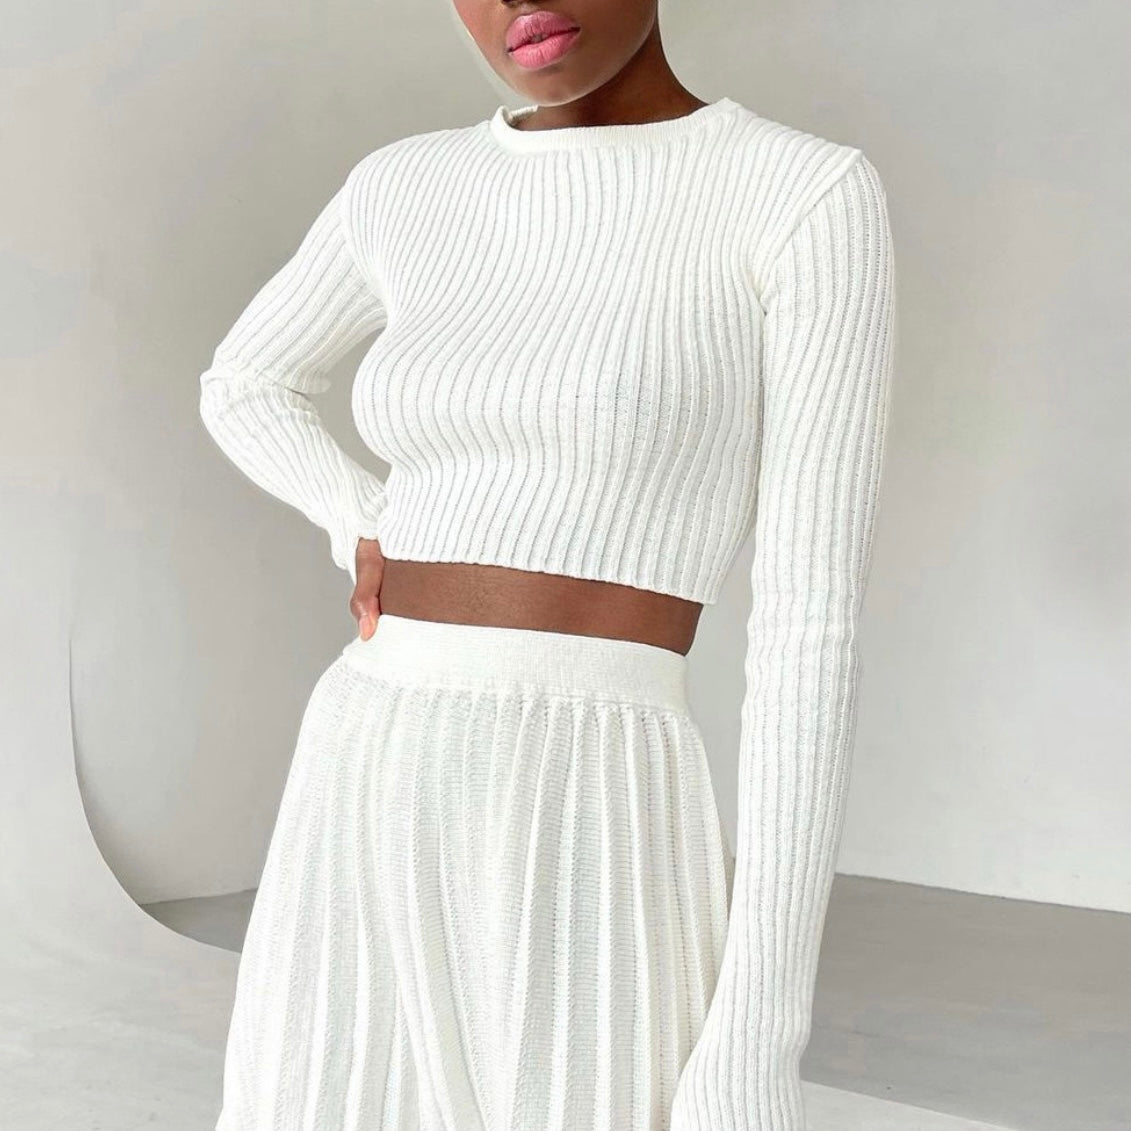 Model wearing Ribbed Knit Long Sleeve Crop Top white knit skirt and top set